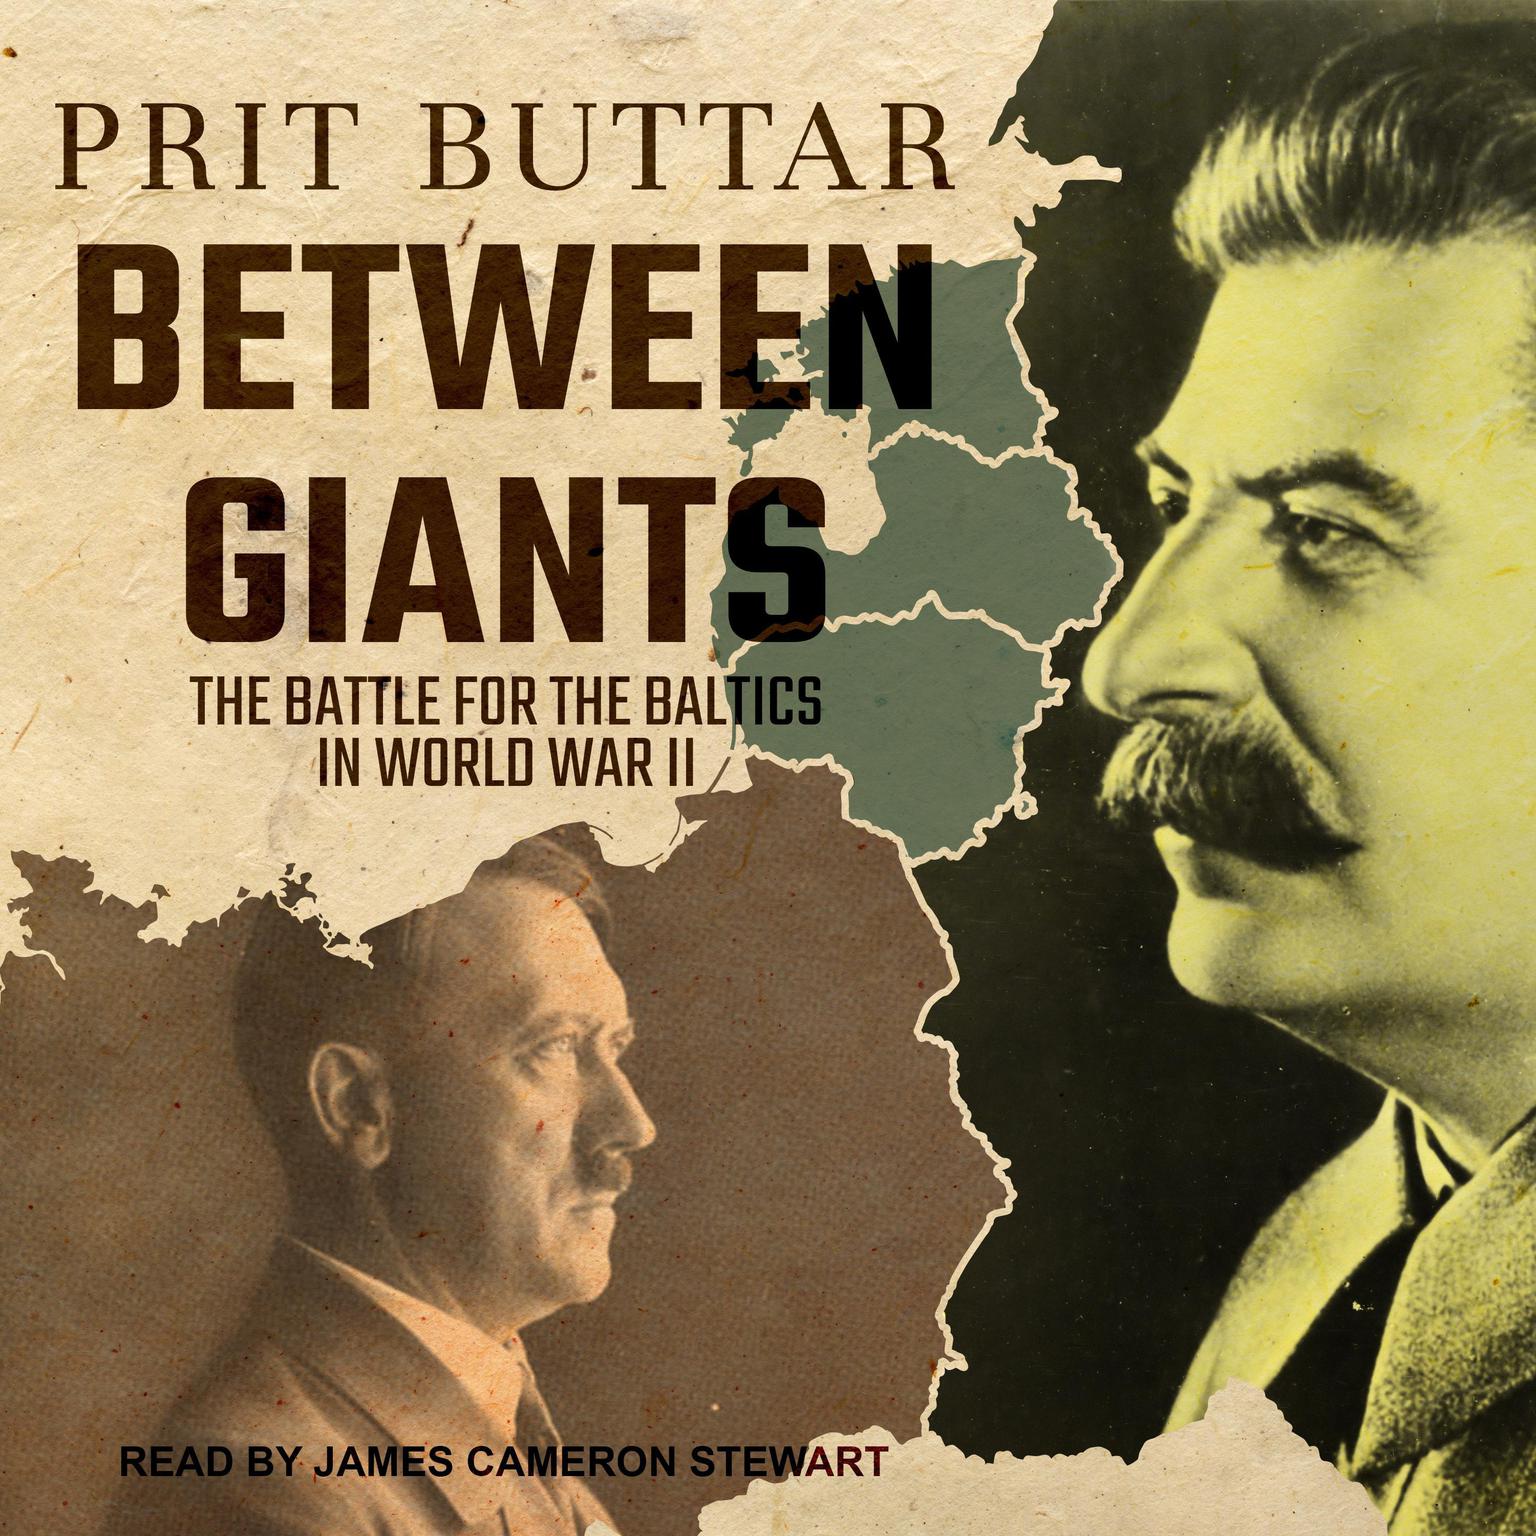 Between Giants: The Battle for the Baltics in World War II Audiobook, by Prit Buttar